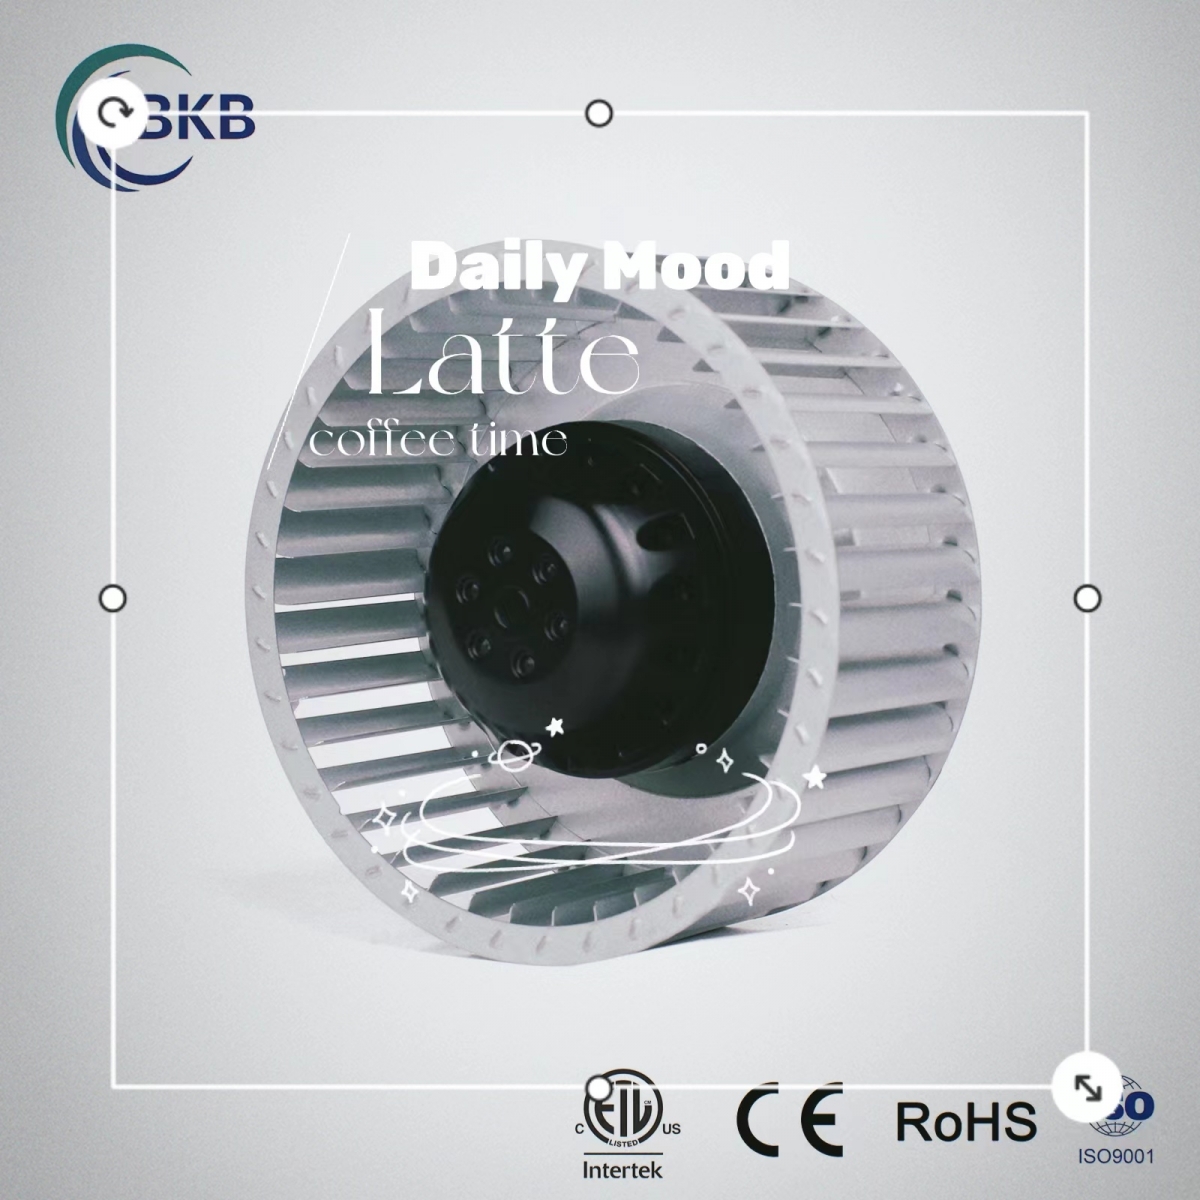 Centrifugal fan suitable for AHU, field retrofit ,dust collection ,exhaust ventilation, air pollution control and paint booth or fume exhaust applications custom fans are also offered .-SUNLIGHT BLOWER,Centrifugal Fans, Inline Fans,Motors,Backward curved centrifugal fans ,Forward curved centrifugal fans ,inlet fans, EC fans